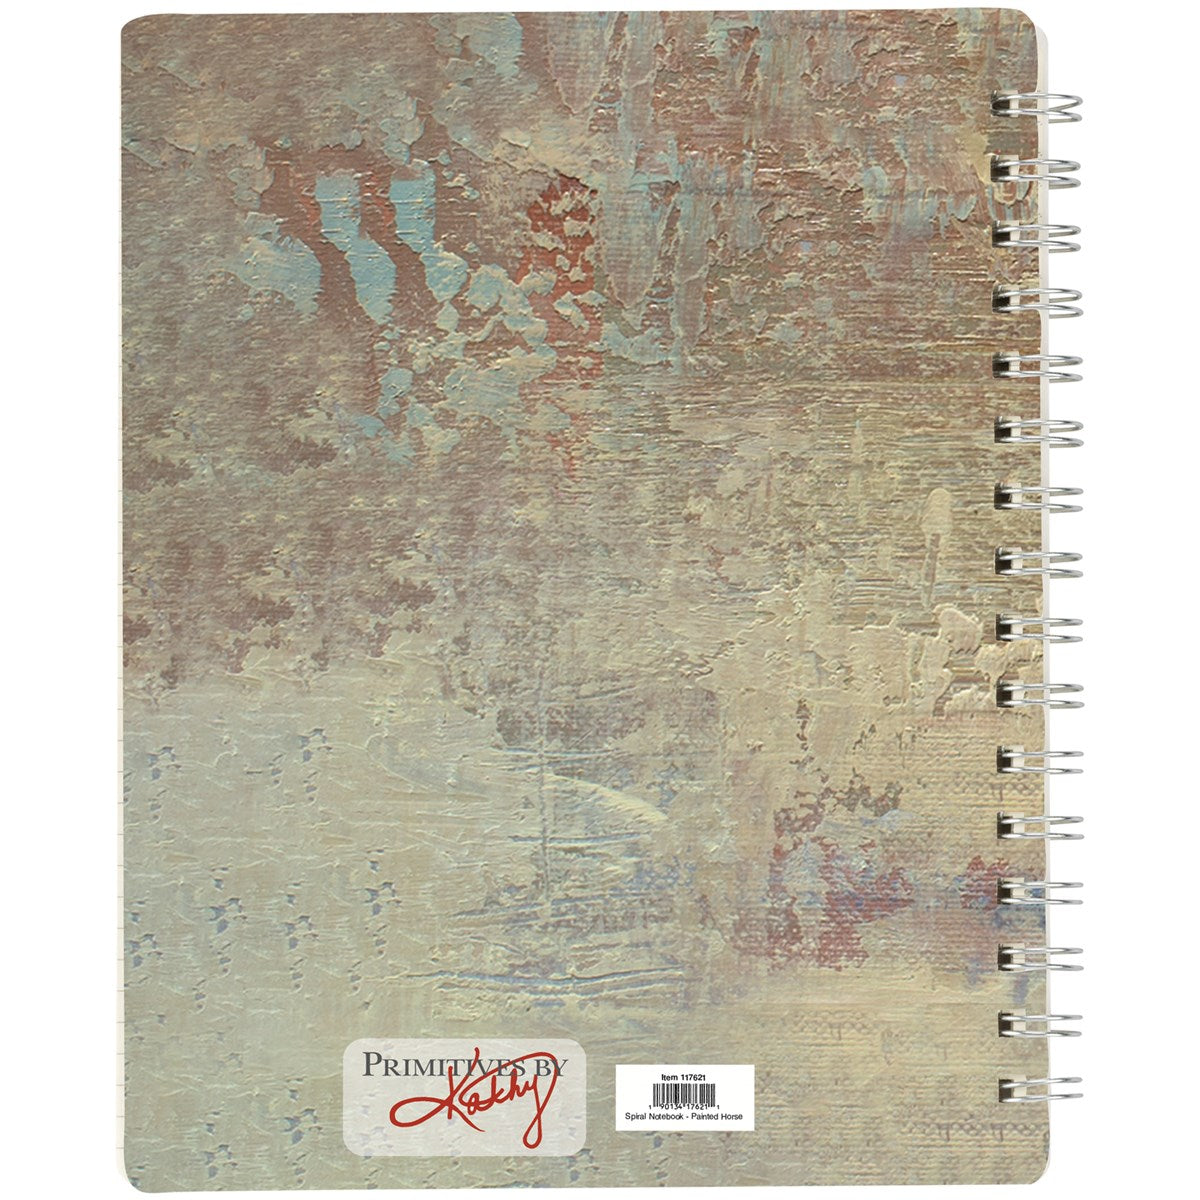 Painted Horse Spiral Notebook